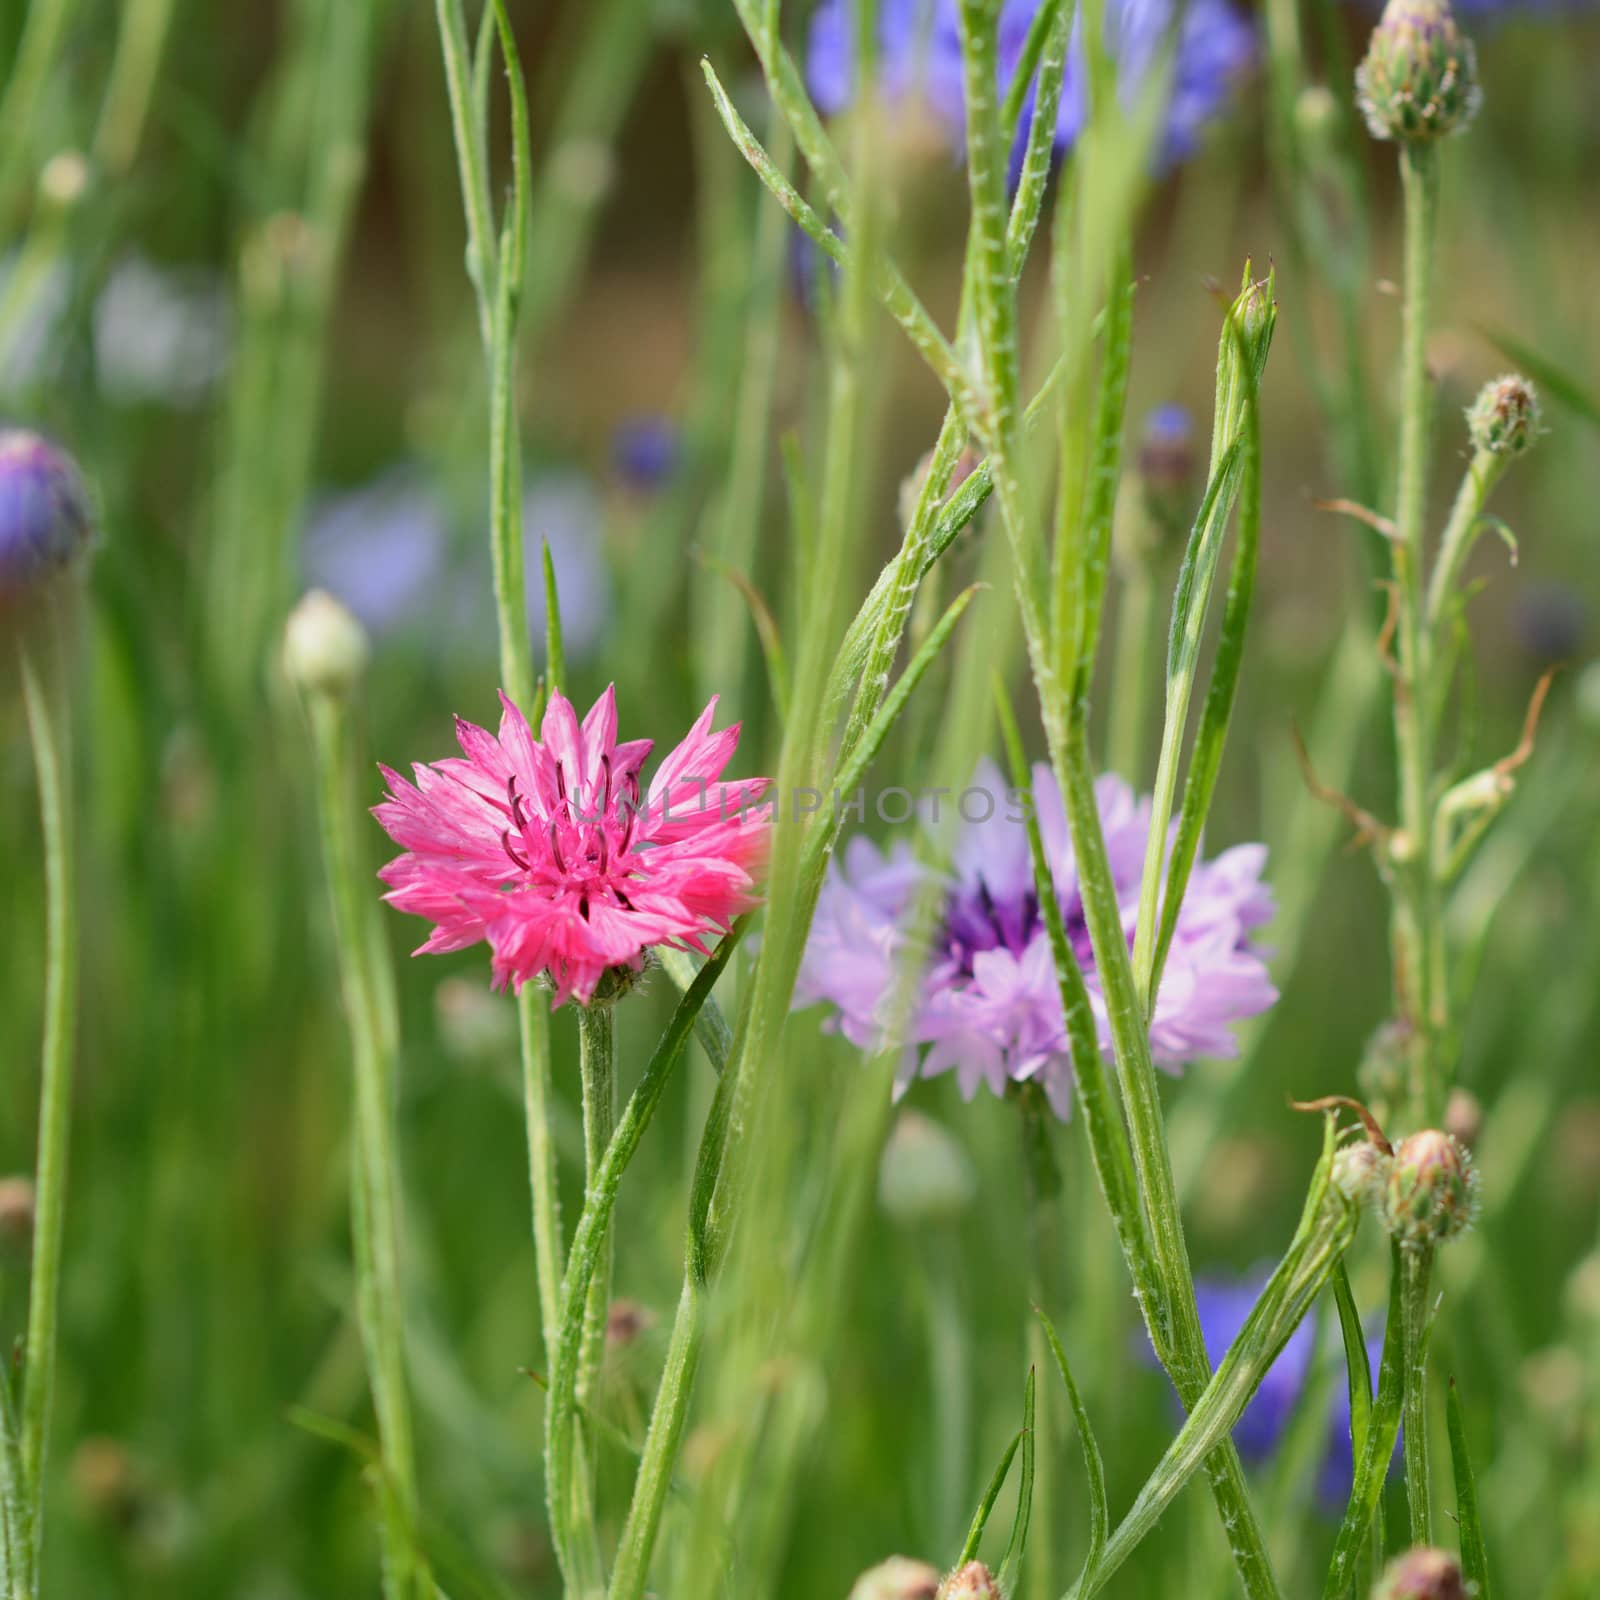 Bright pink cornflower - bachelors button - in selective focus among other flowers